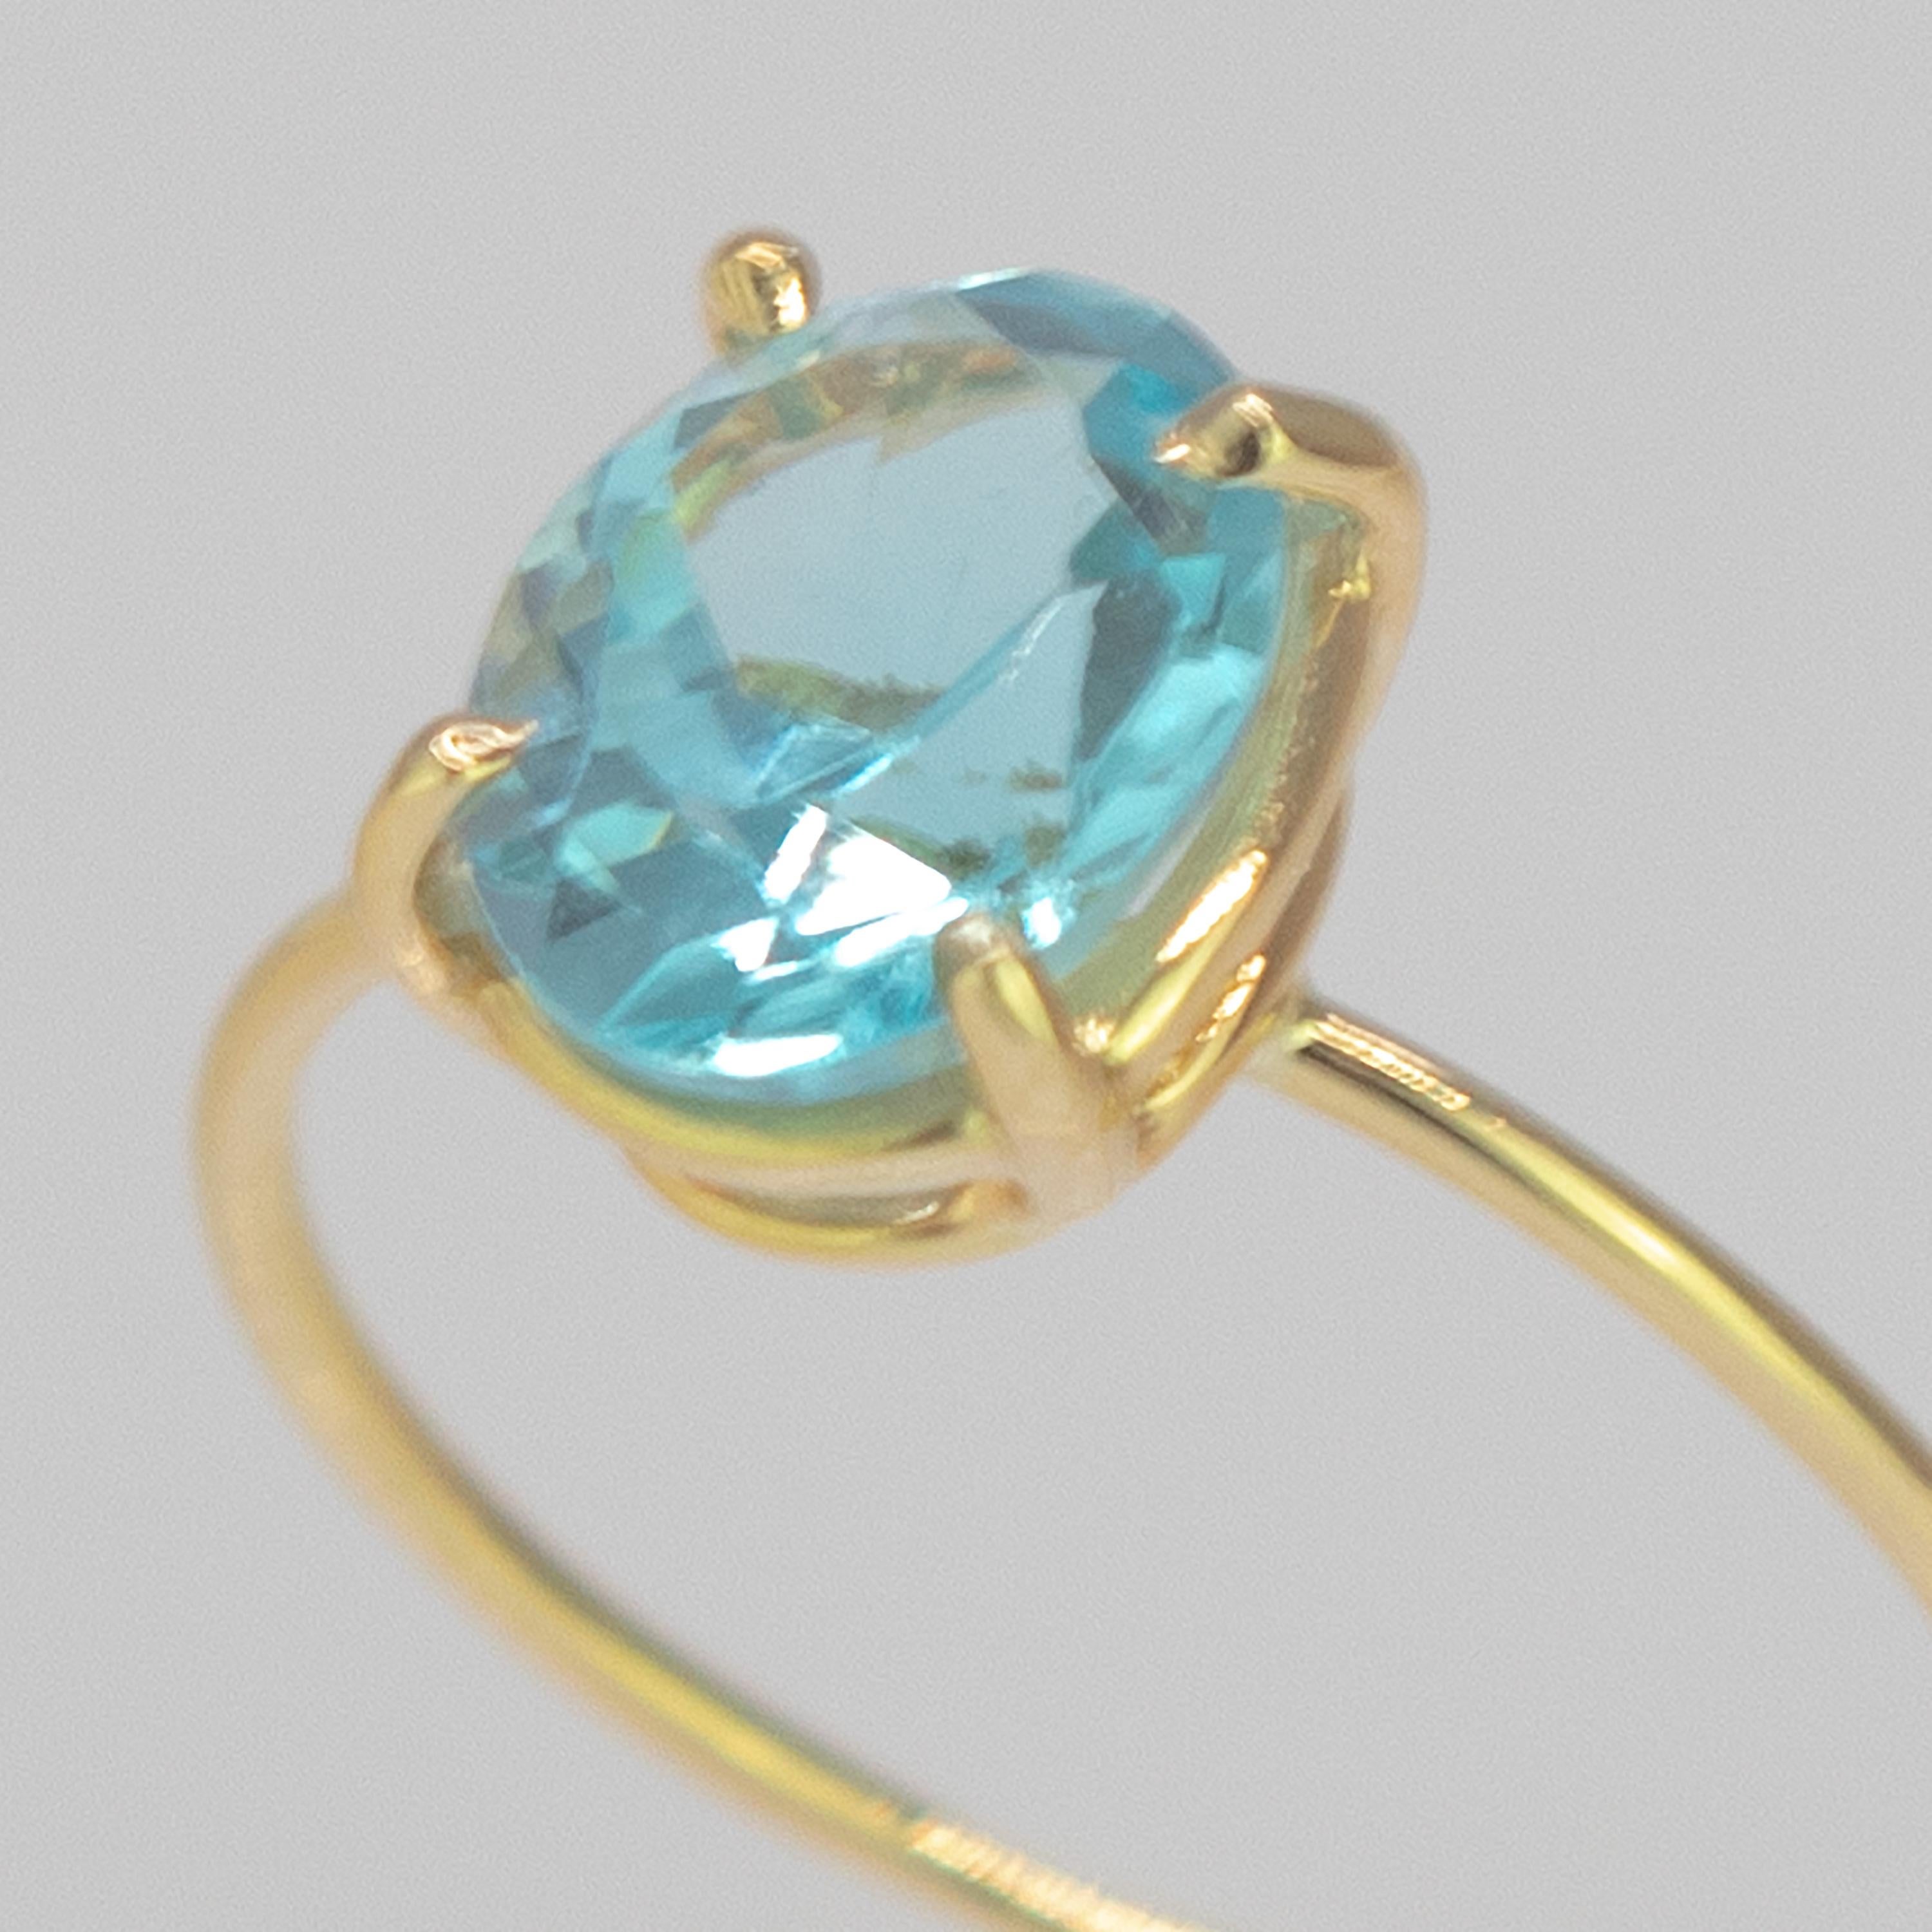 Oval cabochon solitaire ring design, with shining sparkles. 2 carat topaz on 18 karat yellow gold ring inspired by the joy of summer sunsets. With a perfect size, it will fill with your daily elegant outfits.

Topaz precious stone provides relief in